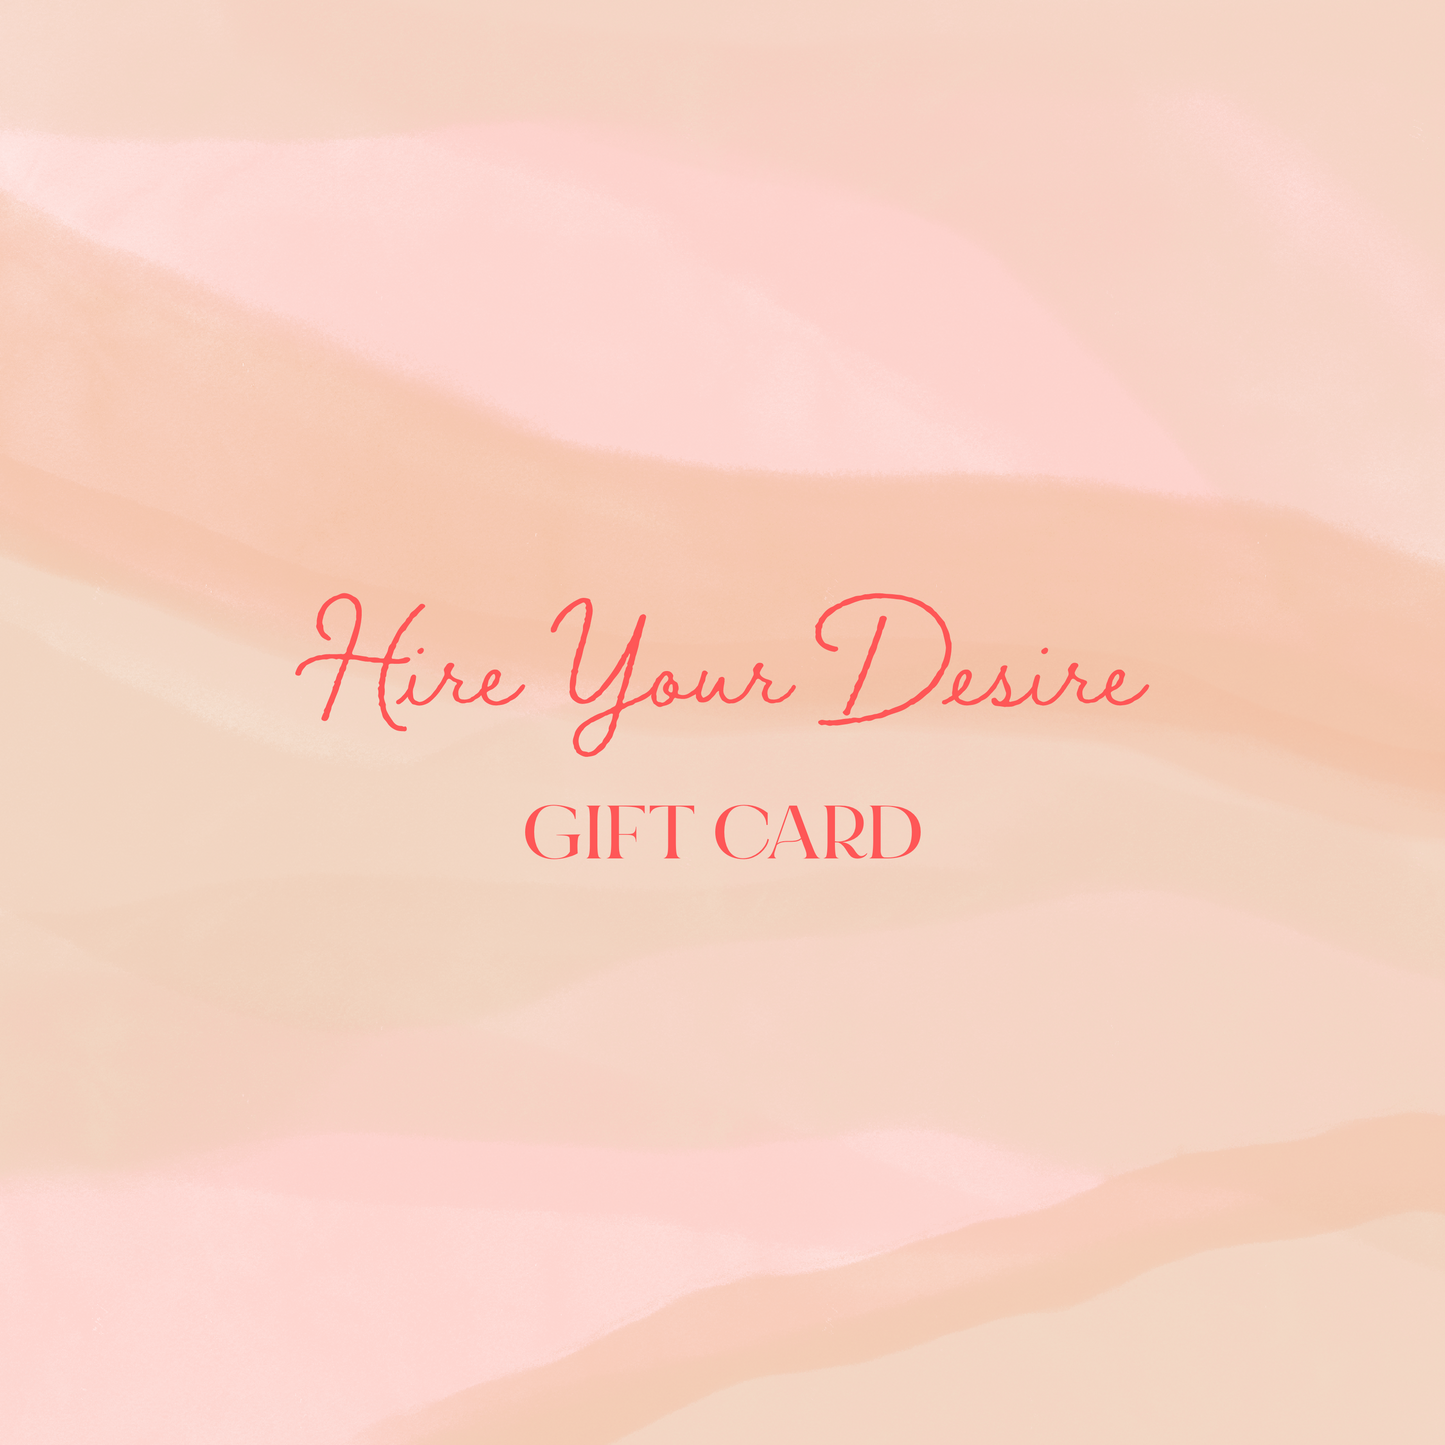 Hire Your Desire Gift Card